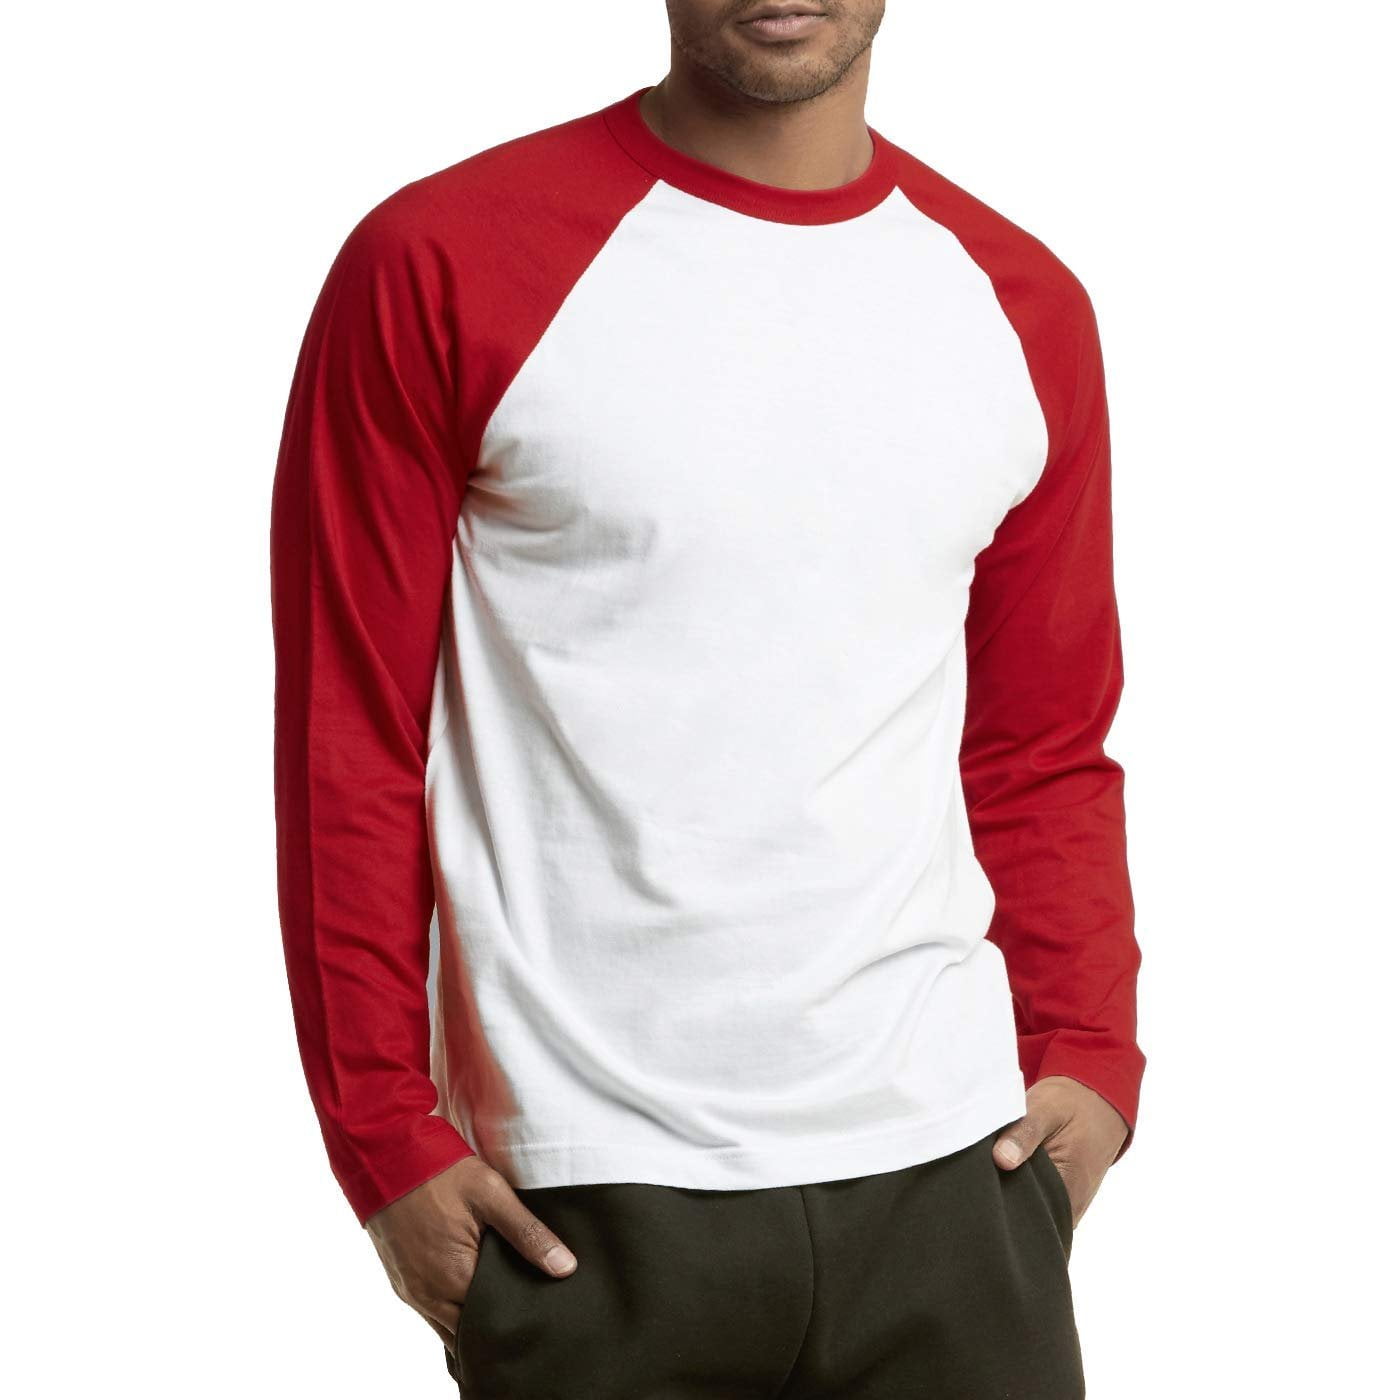 white and red t shirt mens